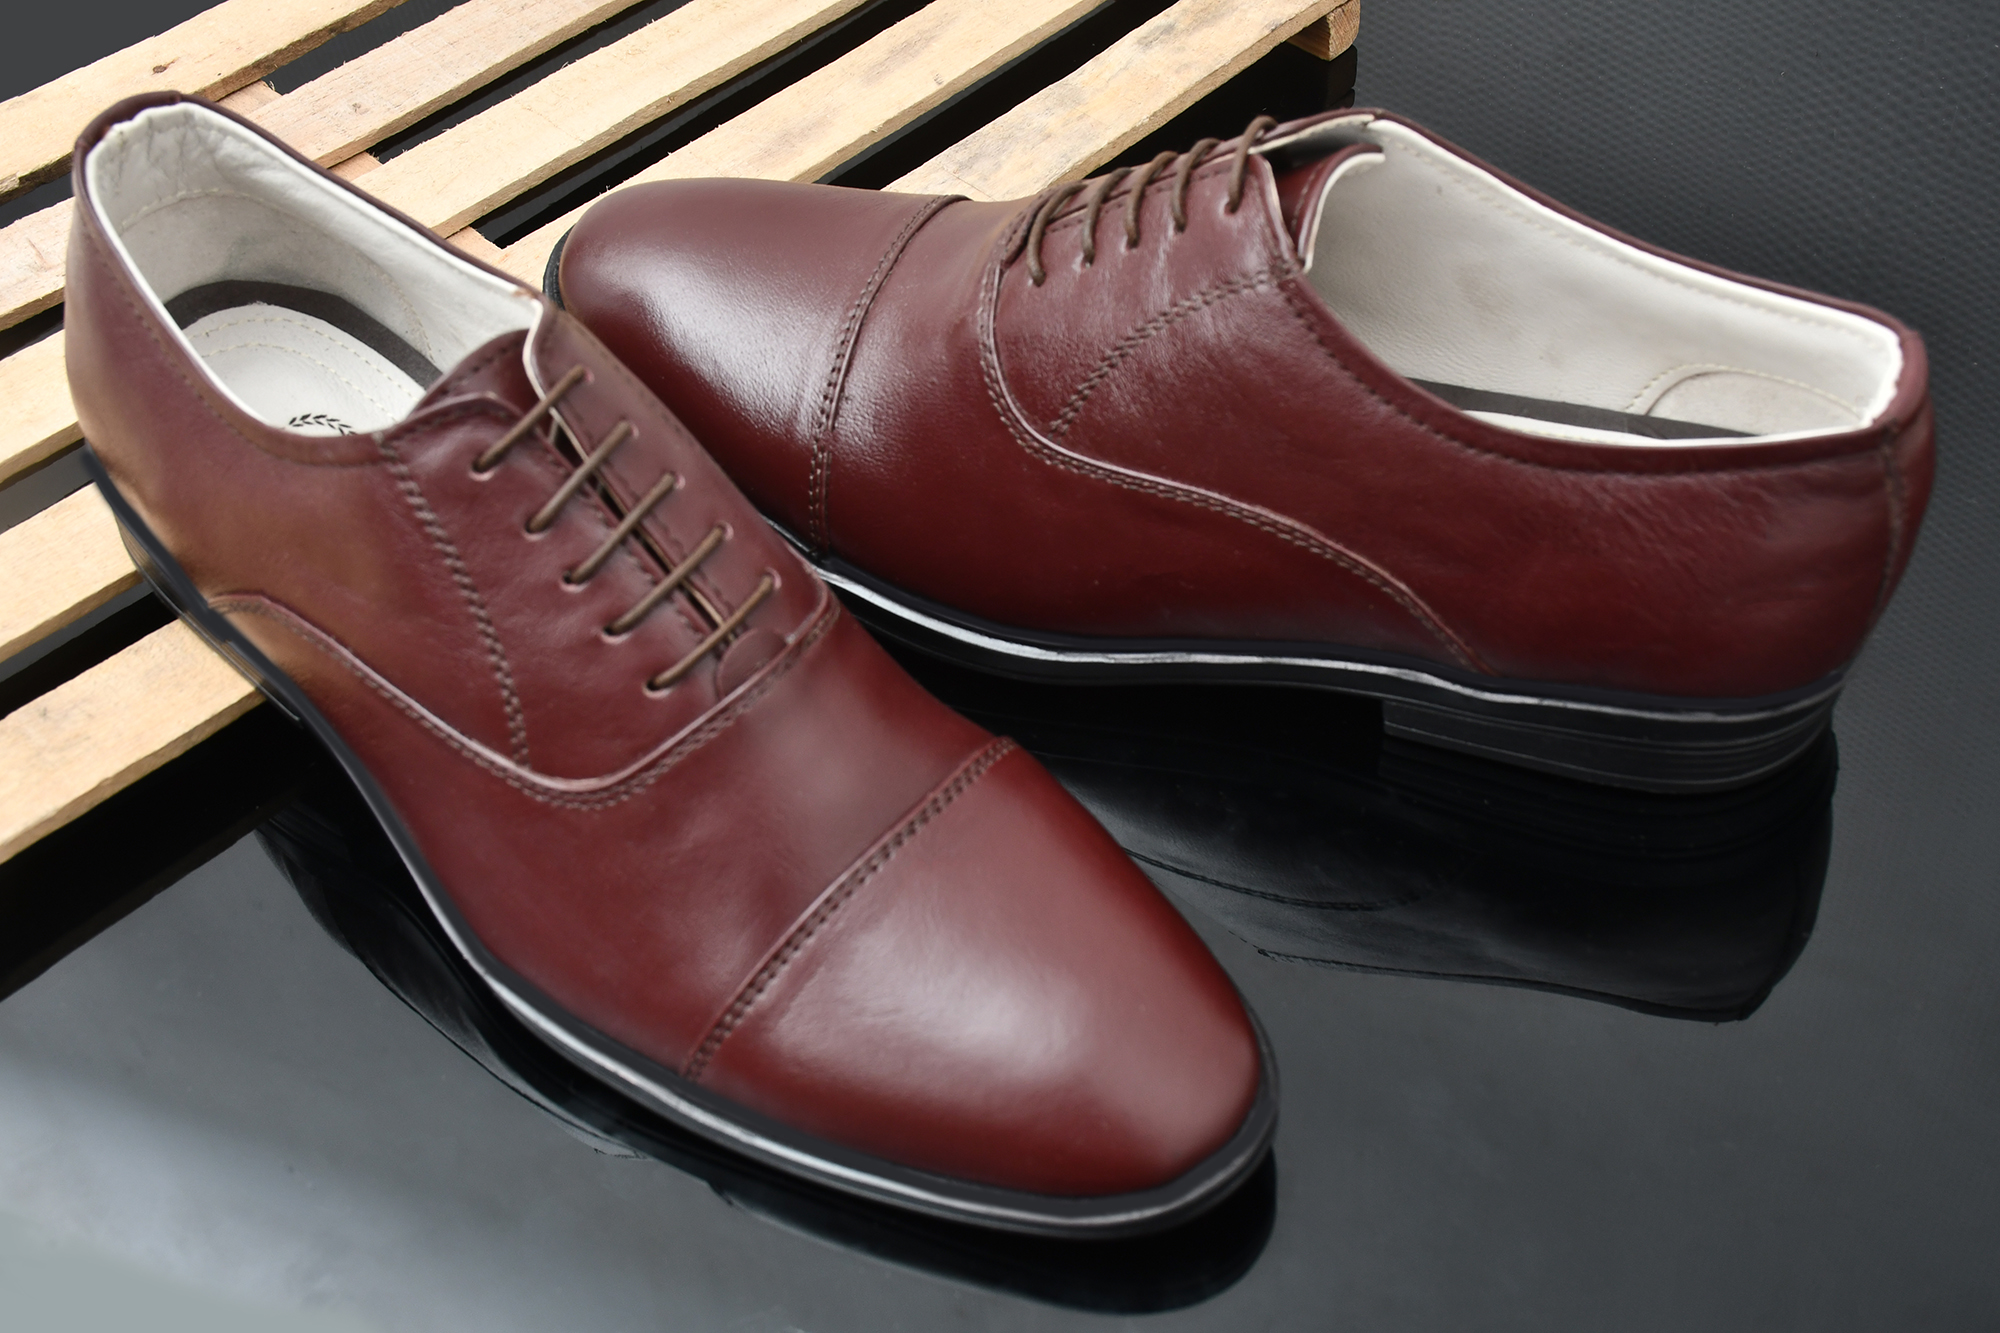 Pure Wine Leather Oxford shoes by asm.